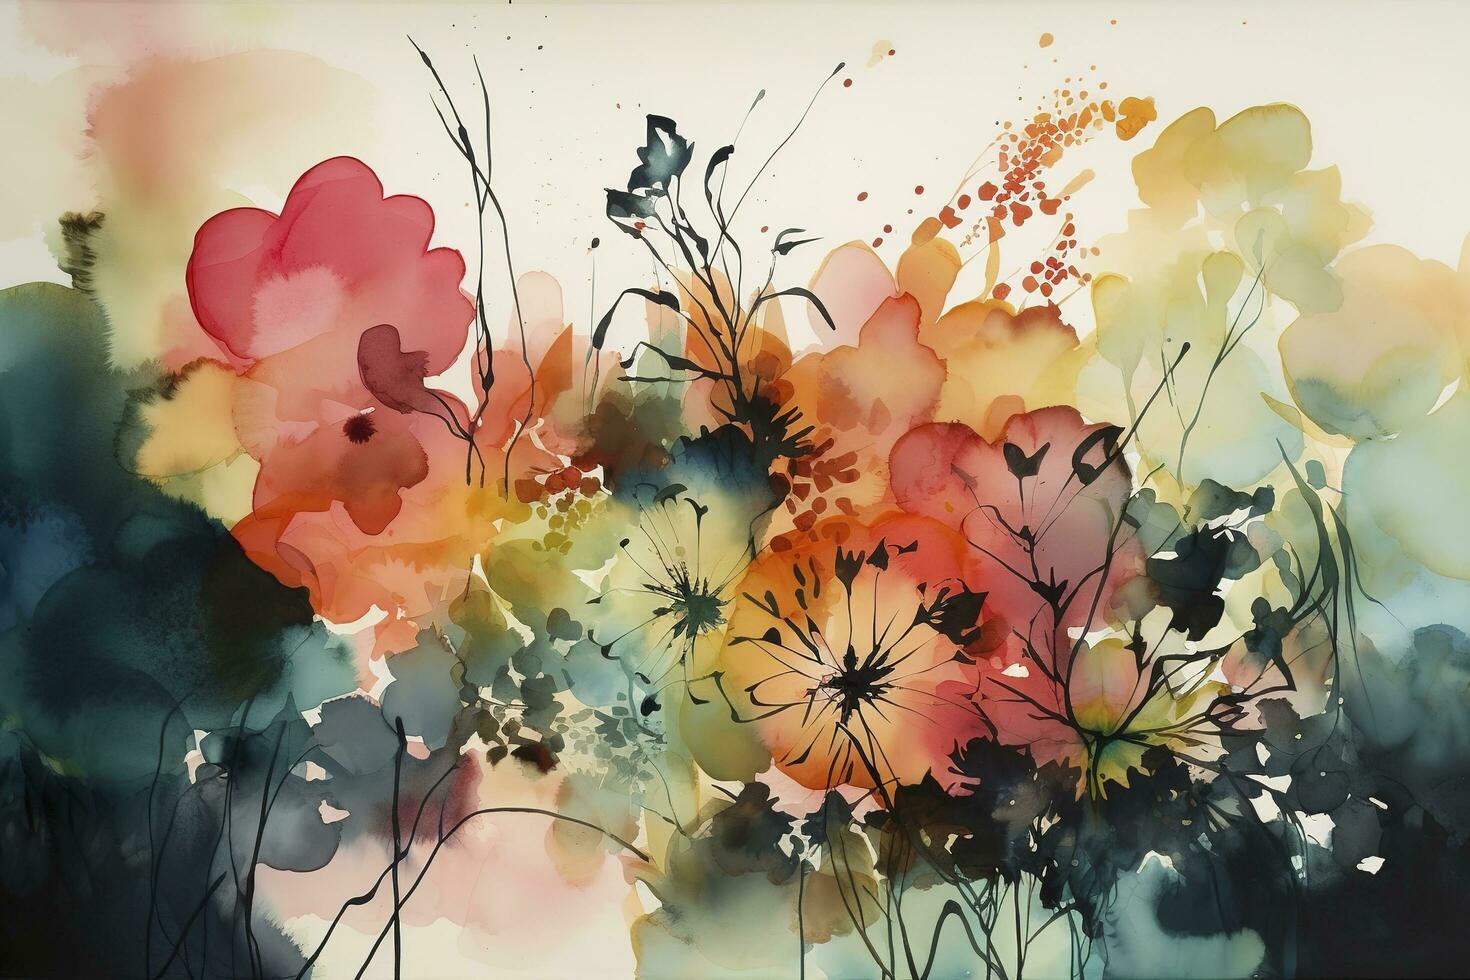 Use watercolor to create a series of abstract floral patterns, using color and shape to capture the essence of flowers without depicting them realistically, generate ai photo